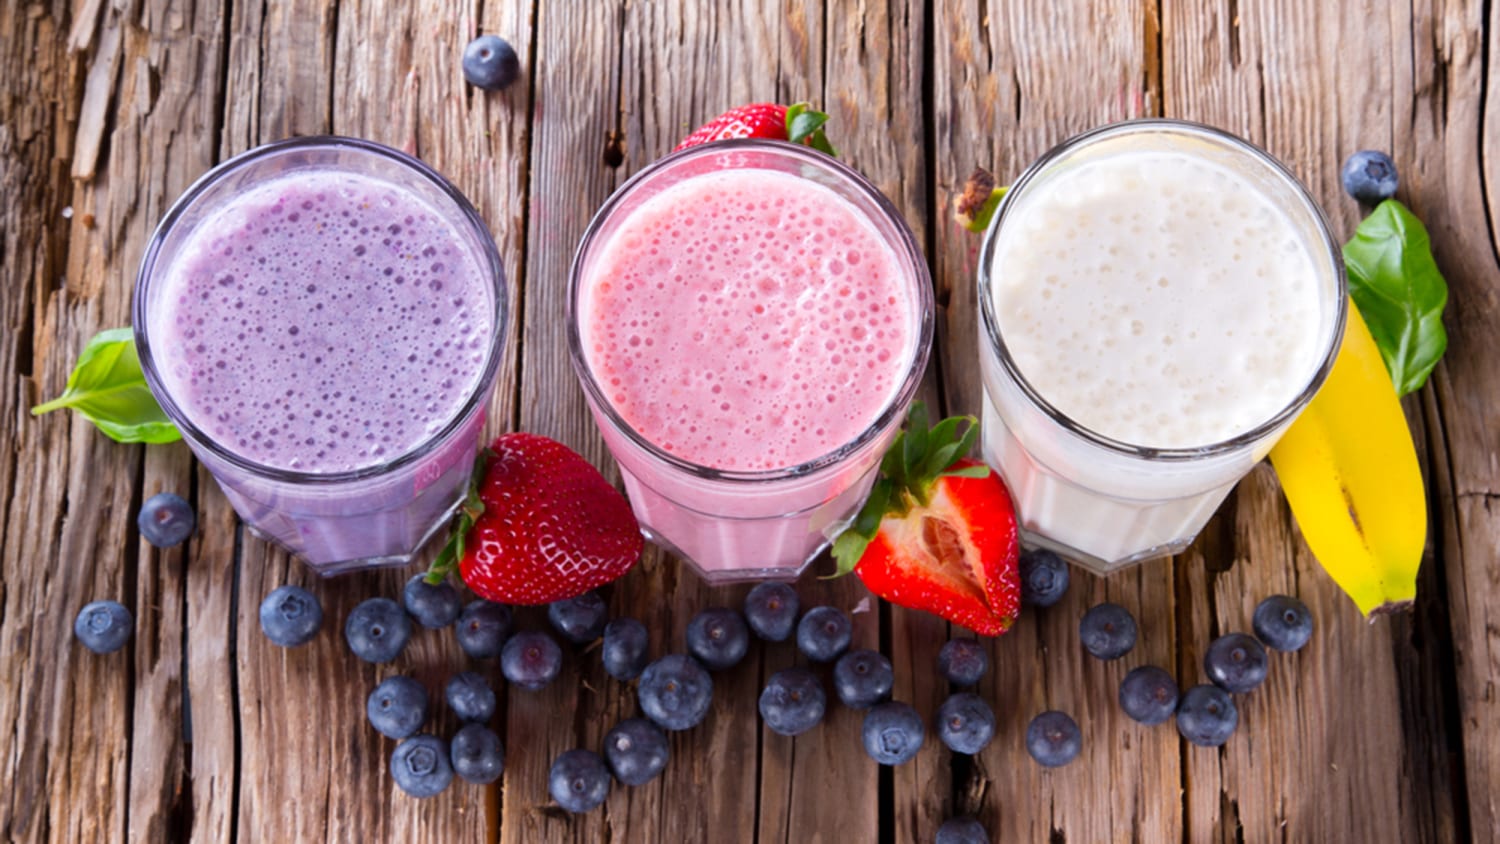 How to order a healthy smoothie (plus a great chocolate smoothie recipe)